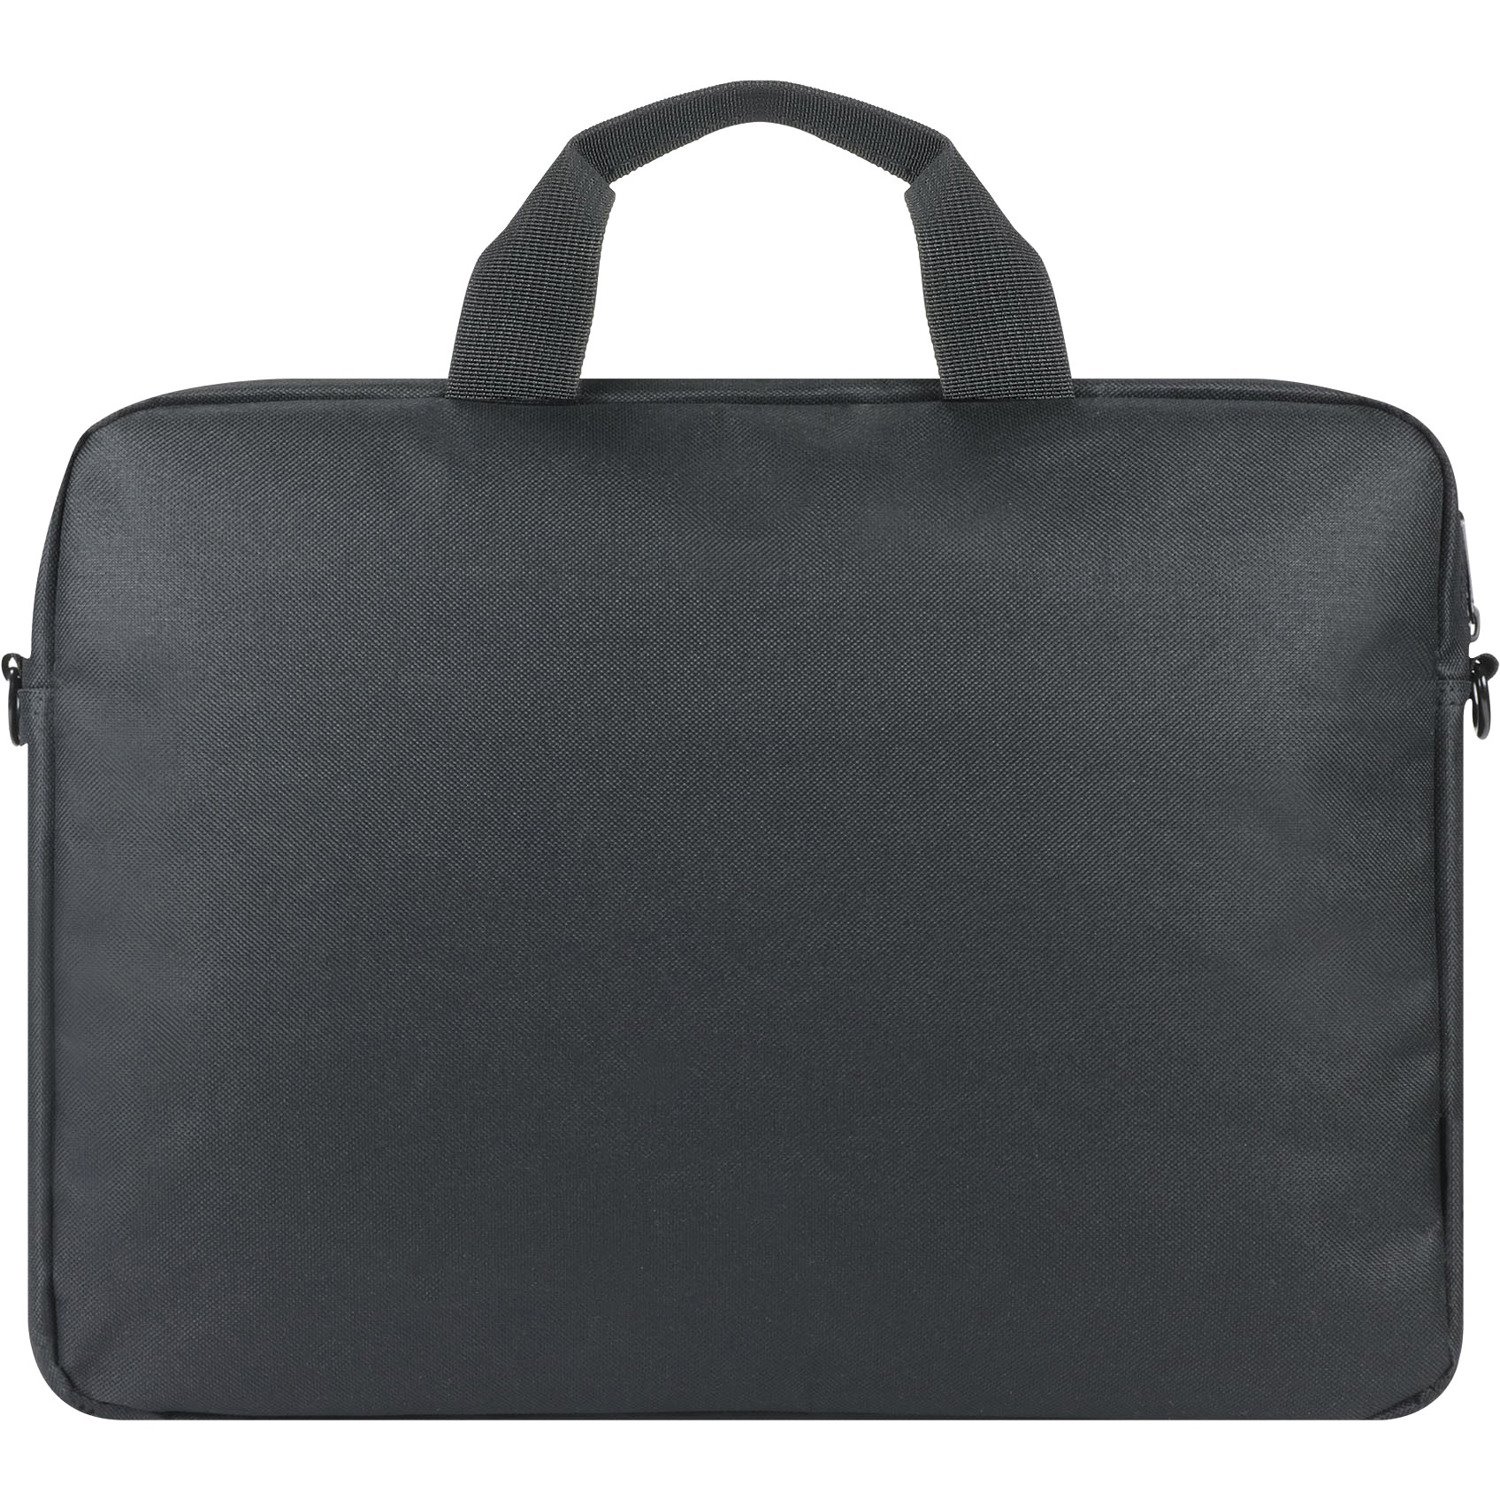 MOBILIS The One Carrying Case (Briefcase) for 35.6 cm (14") to 40.6 cm (16") Notebook, Accessories - Black